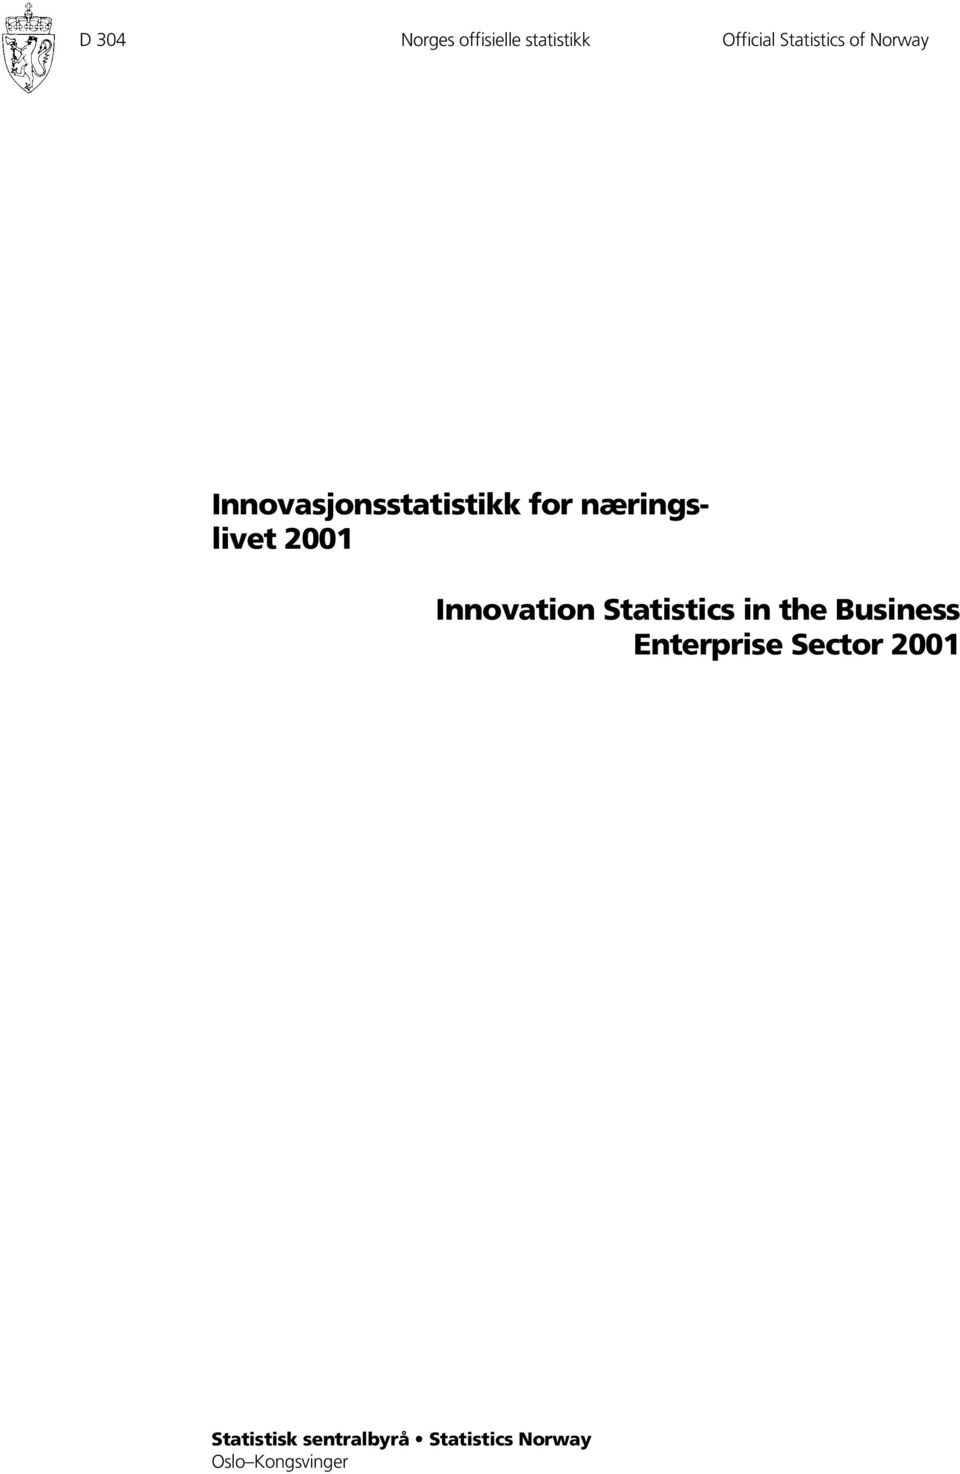 Innovation Statistics in the Business Enterprise Sector